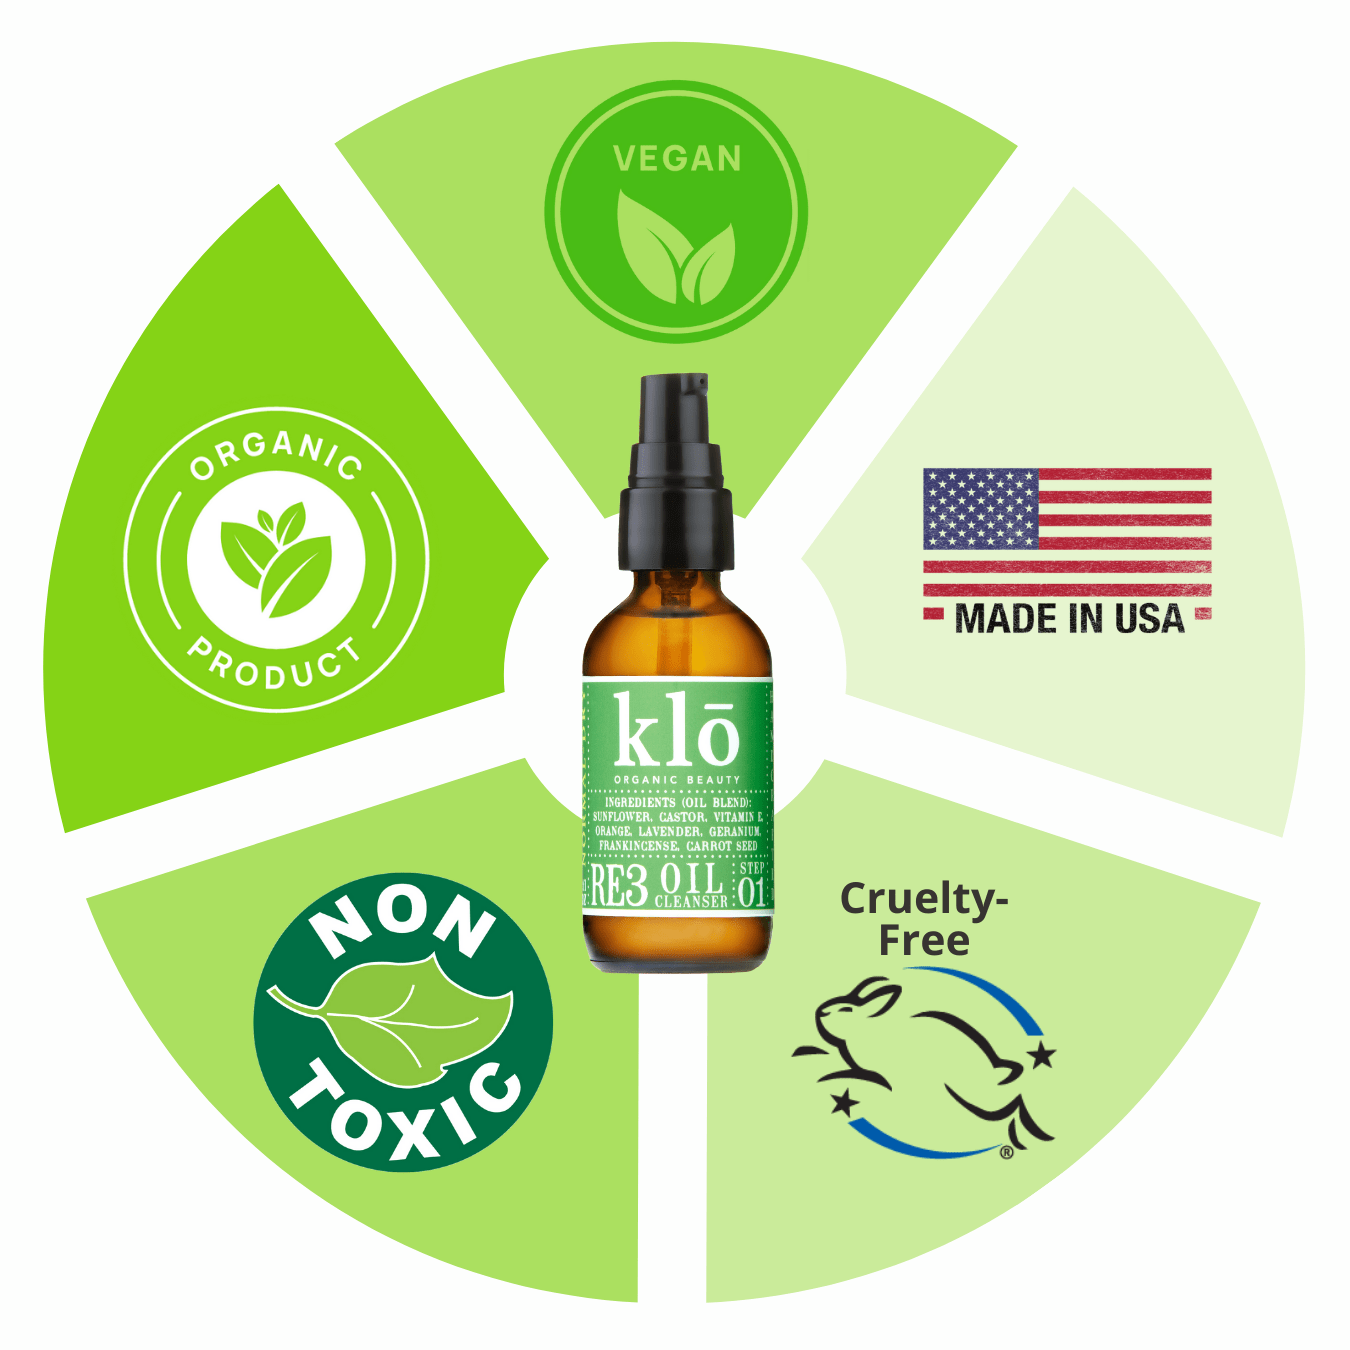 Klo Organic Beauty RE3 oil cleanser for normal-dry skin is vegan, organic, nontoxic, cruelty-free, and made in the USA.